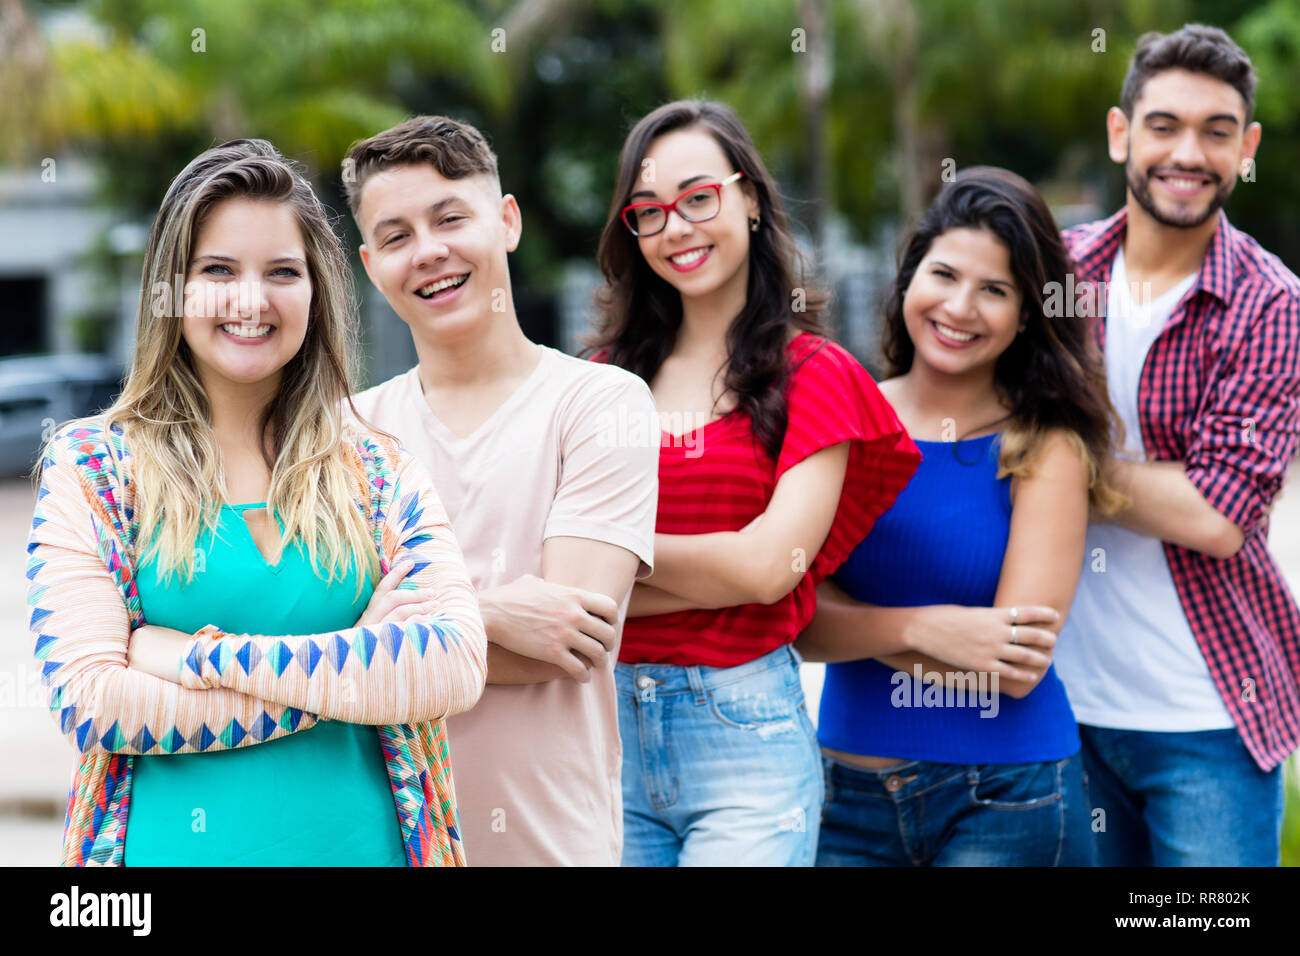 German girl with male and female young adults in line outdoor in the city Stock Photo